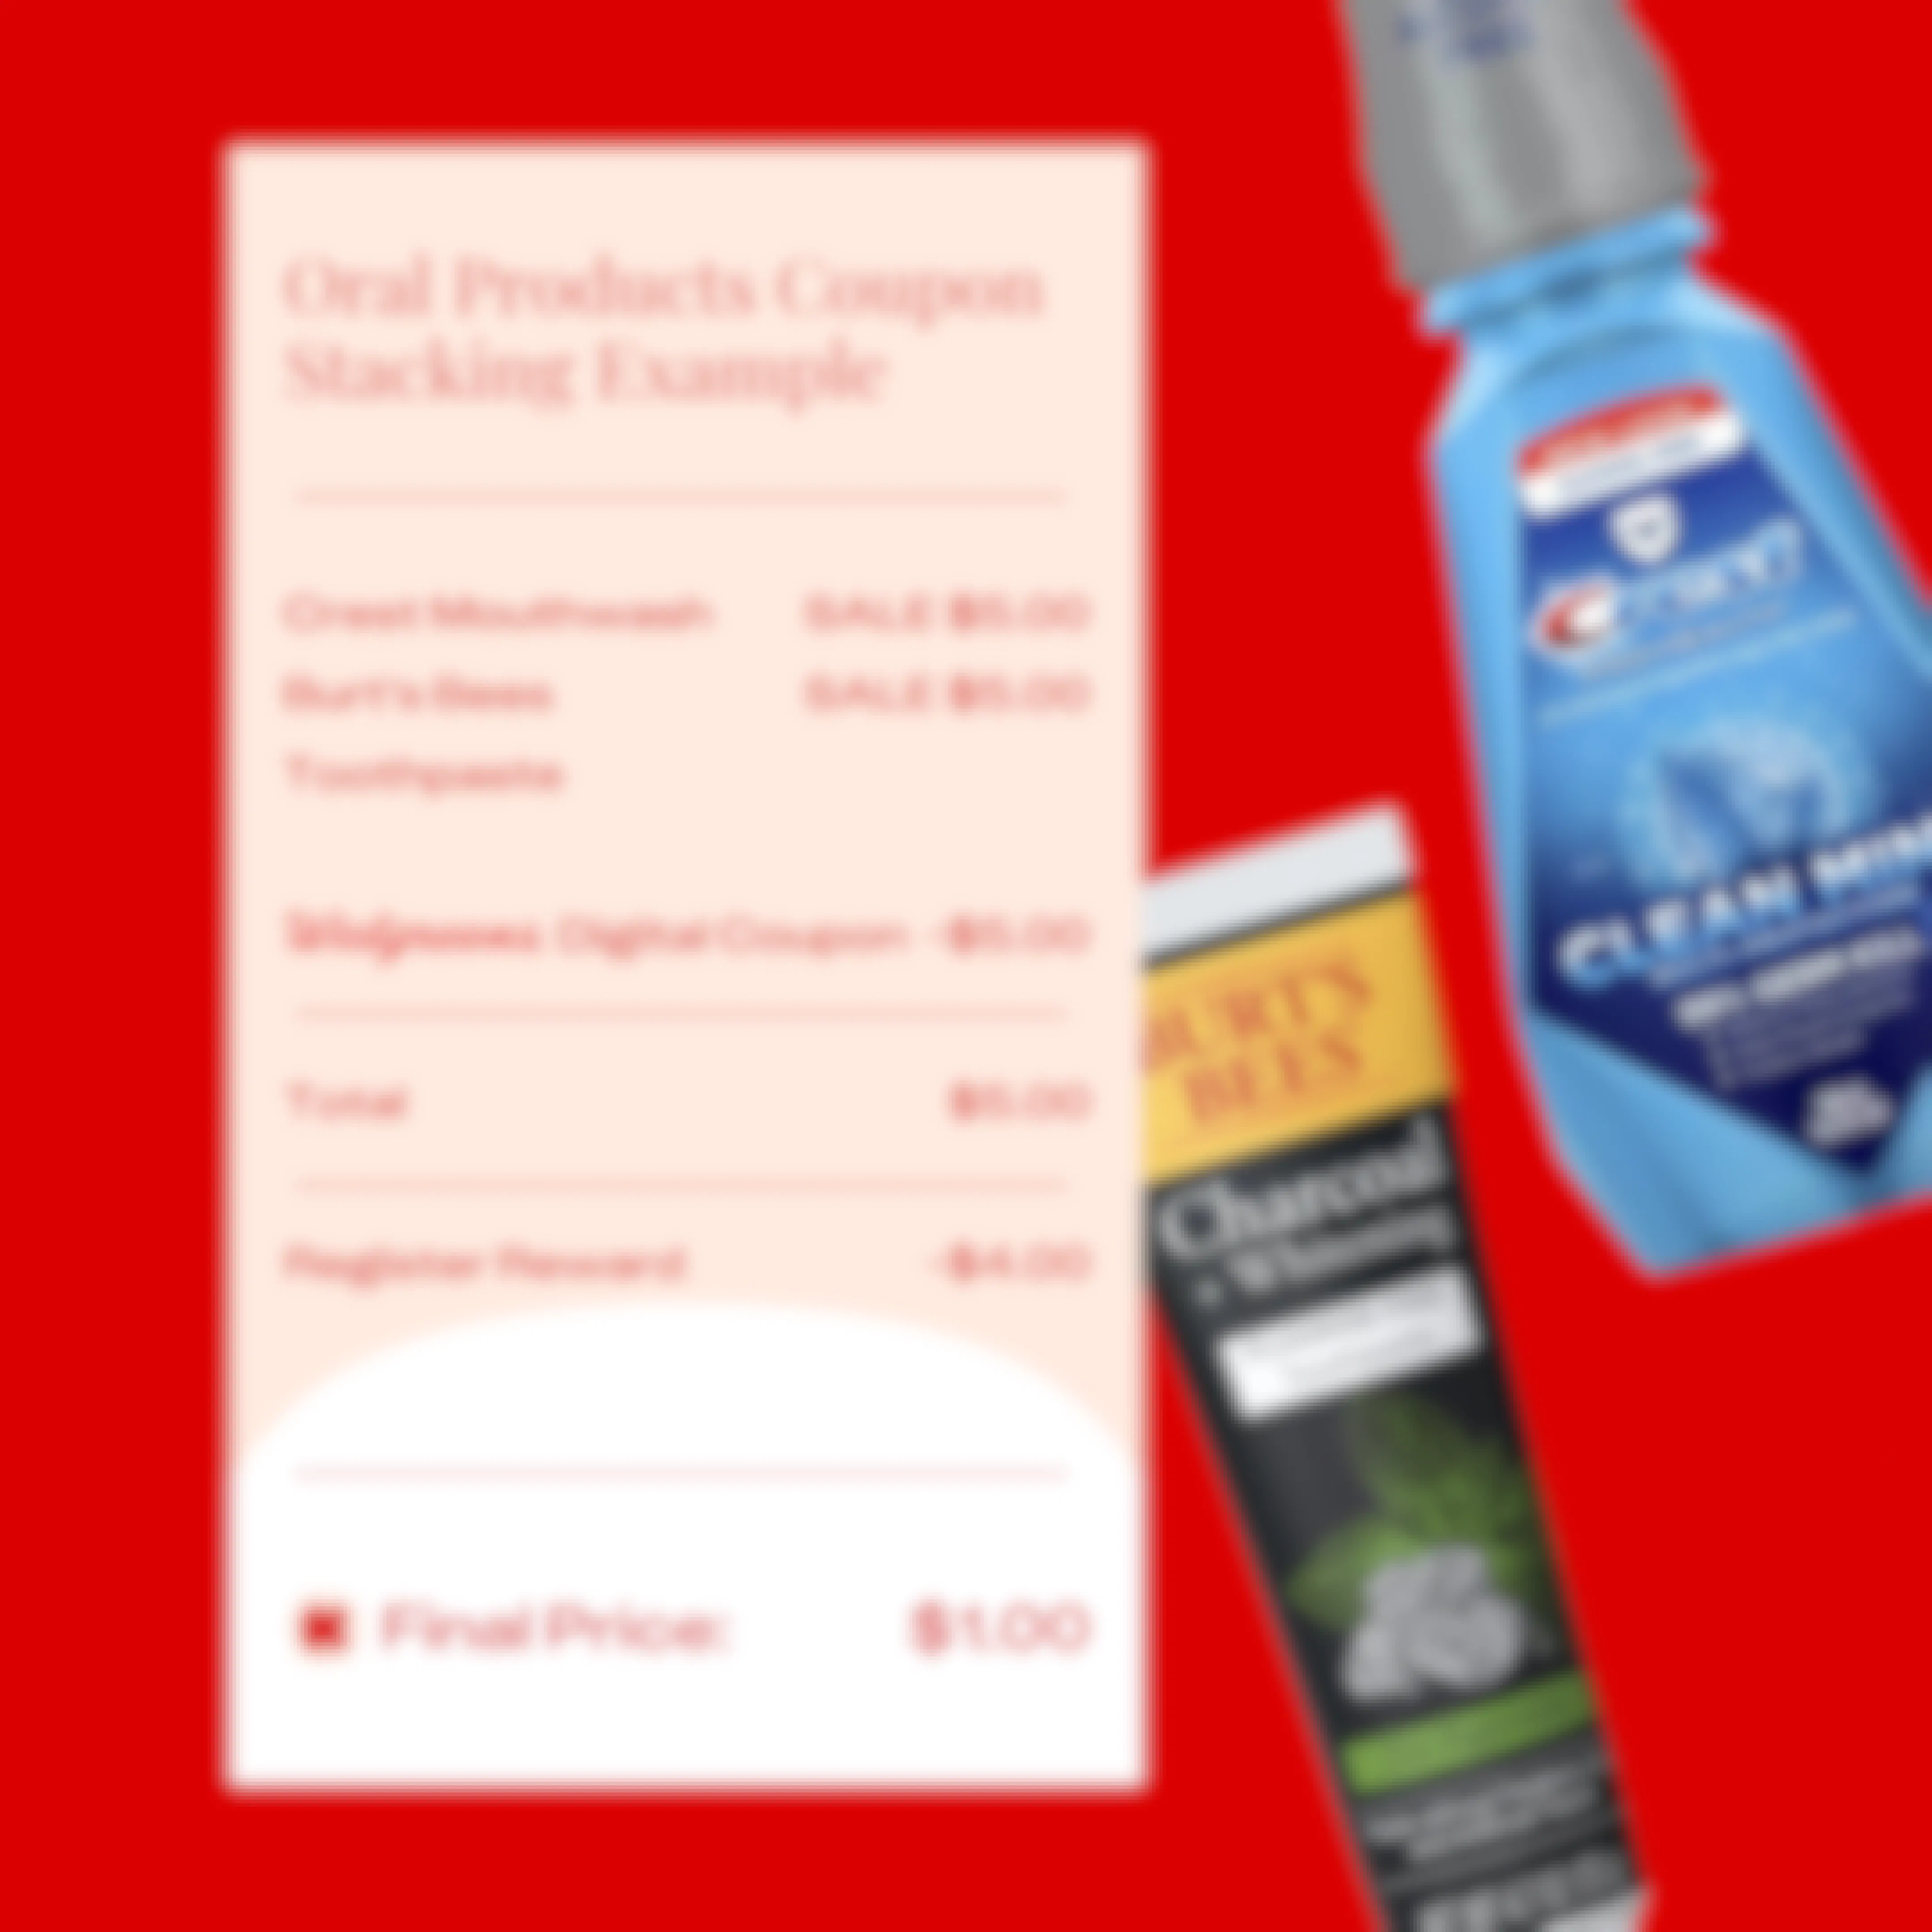 a coupon stacking example for oral products at walgreens